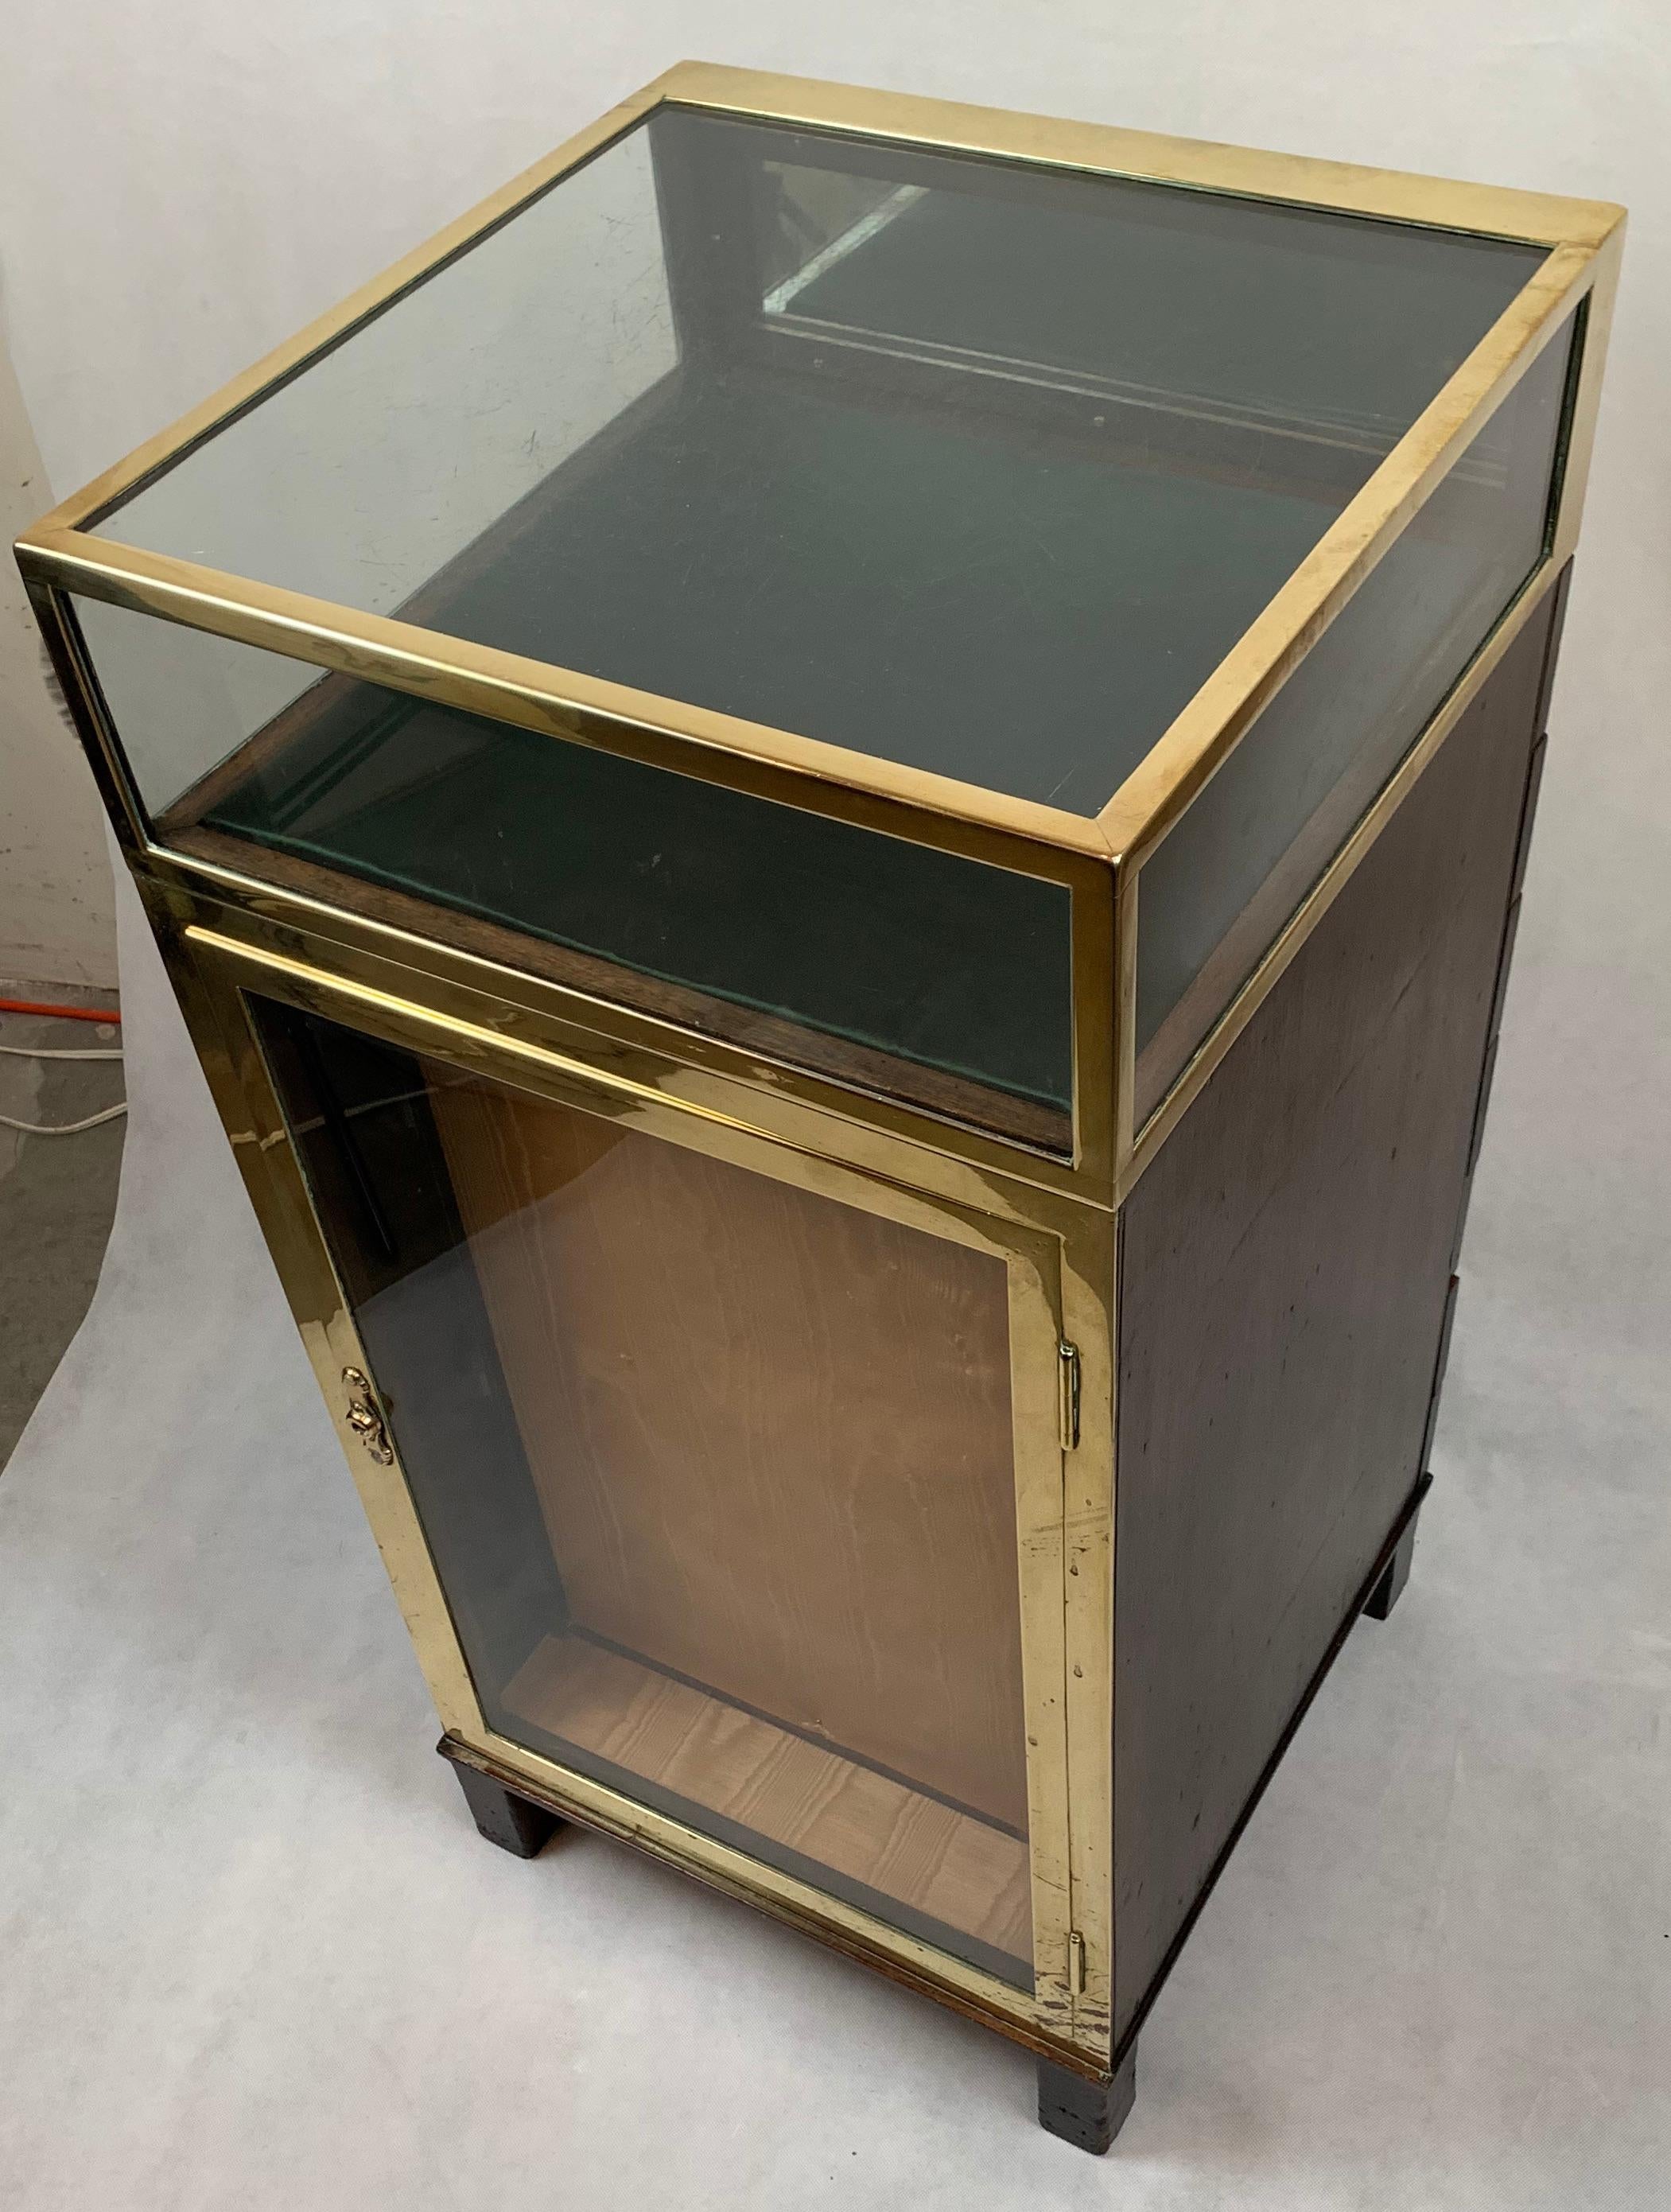 This unusual compact display or collector's cabinet is quite unusual. There is the main display area on the top which can be accessed from the back. The front brass bound glass door opens from the front. There are three glass shelves plus the bottom